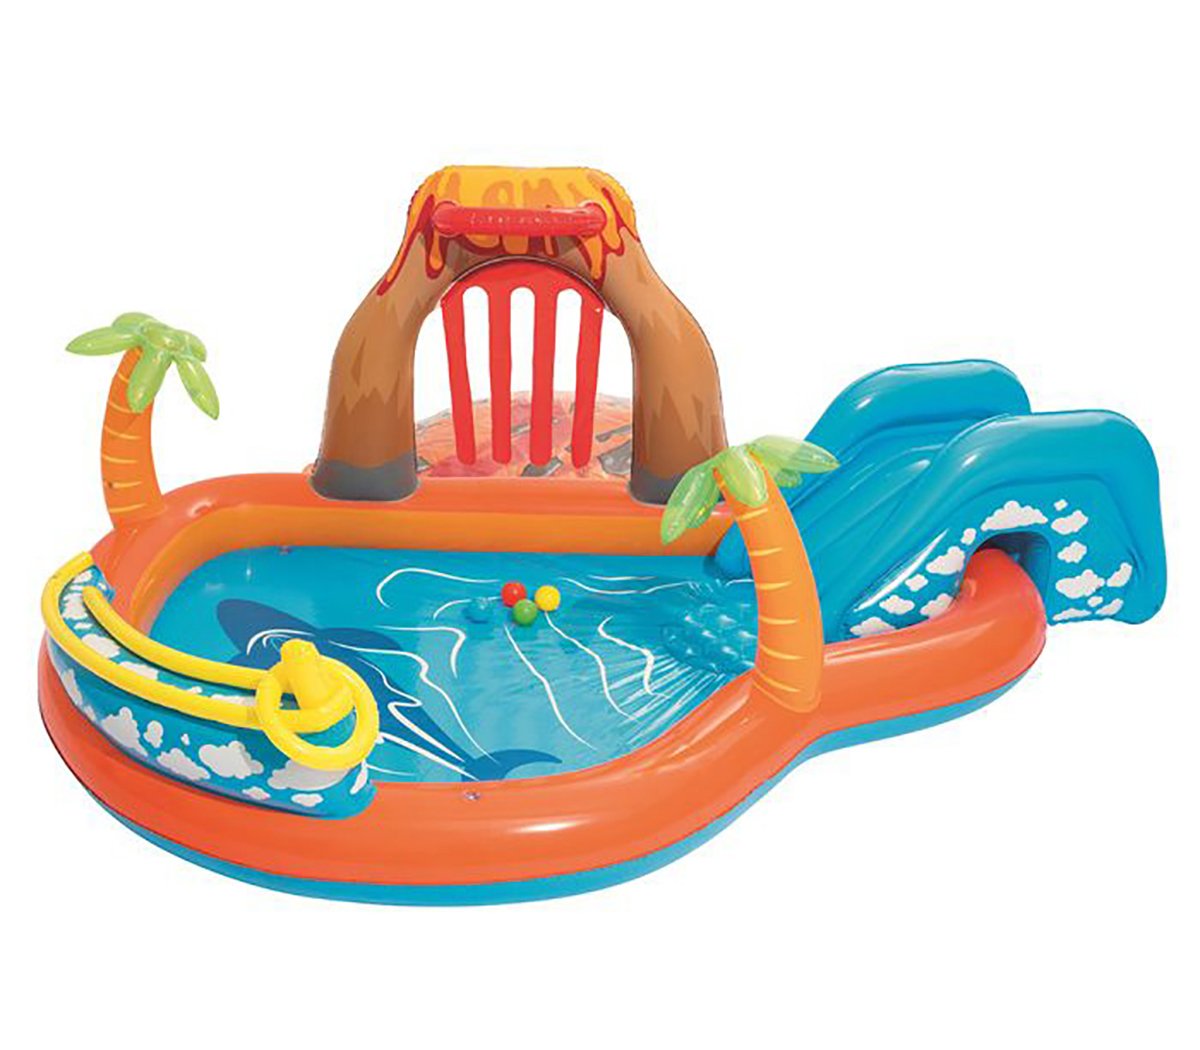 Chad Valley 8.5ft Volcano Activity Kids Paddling Pool Review